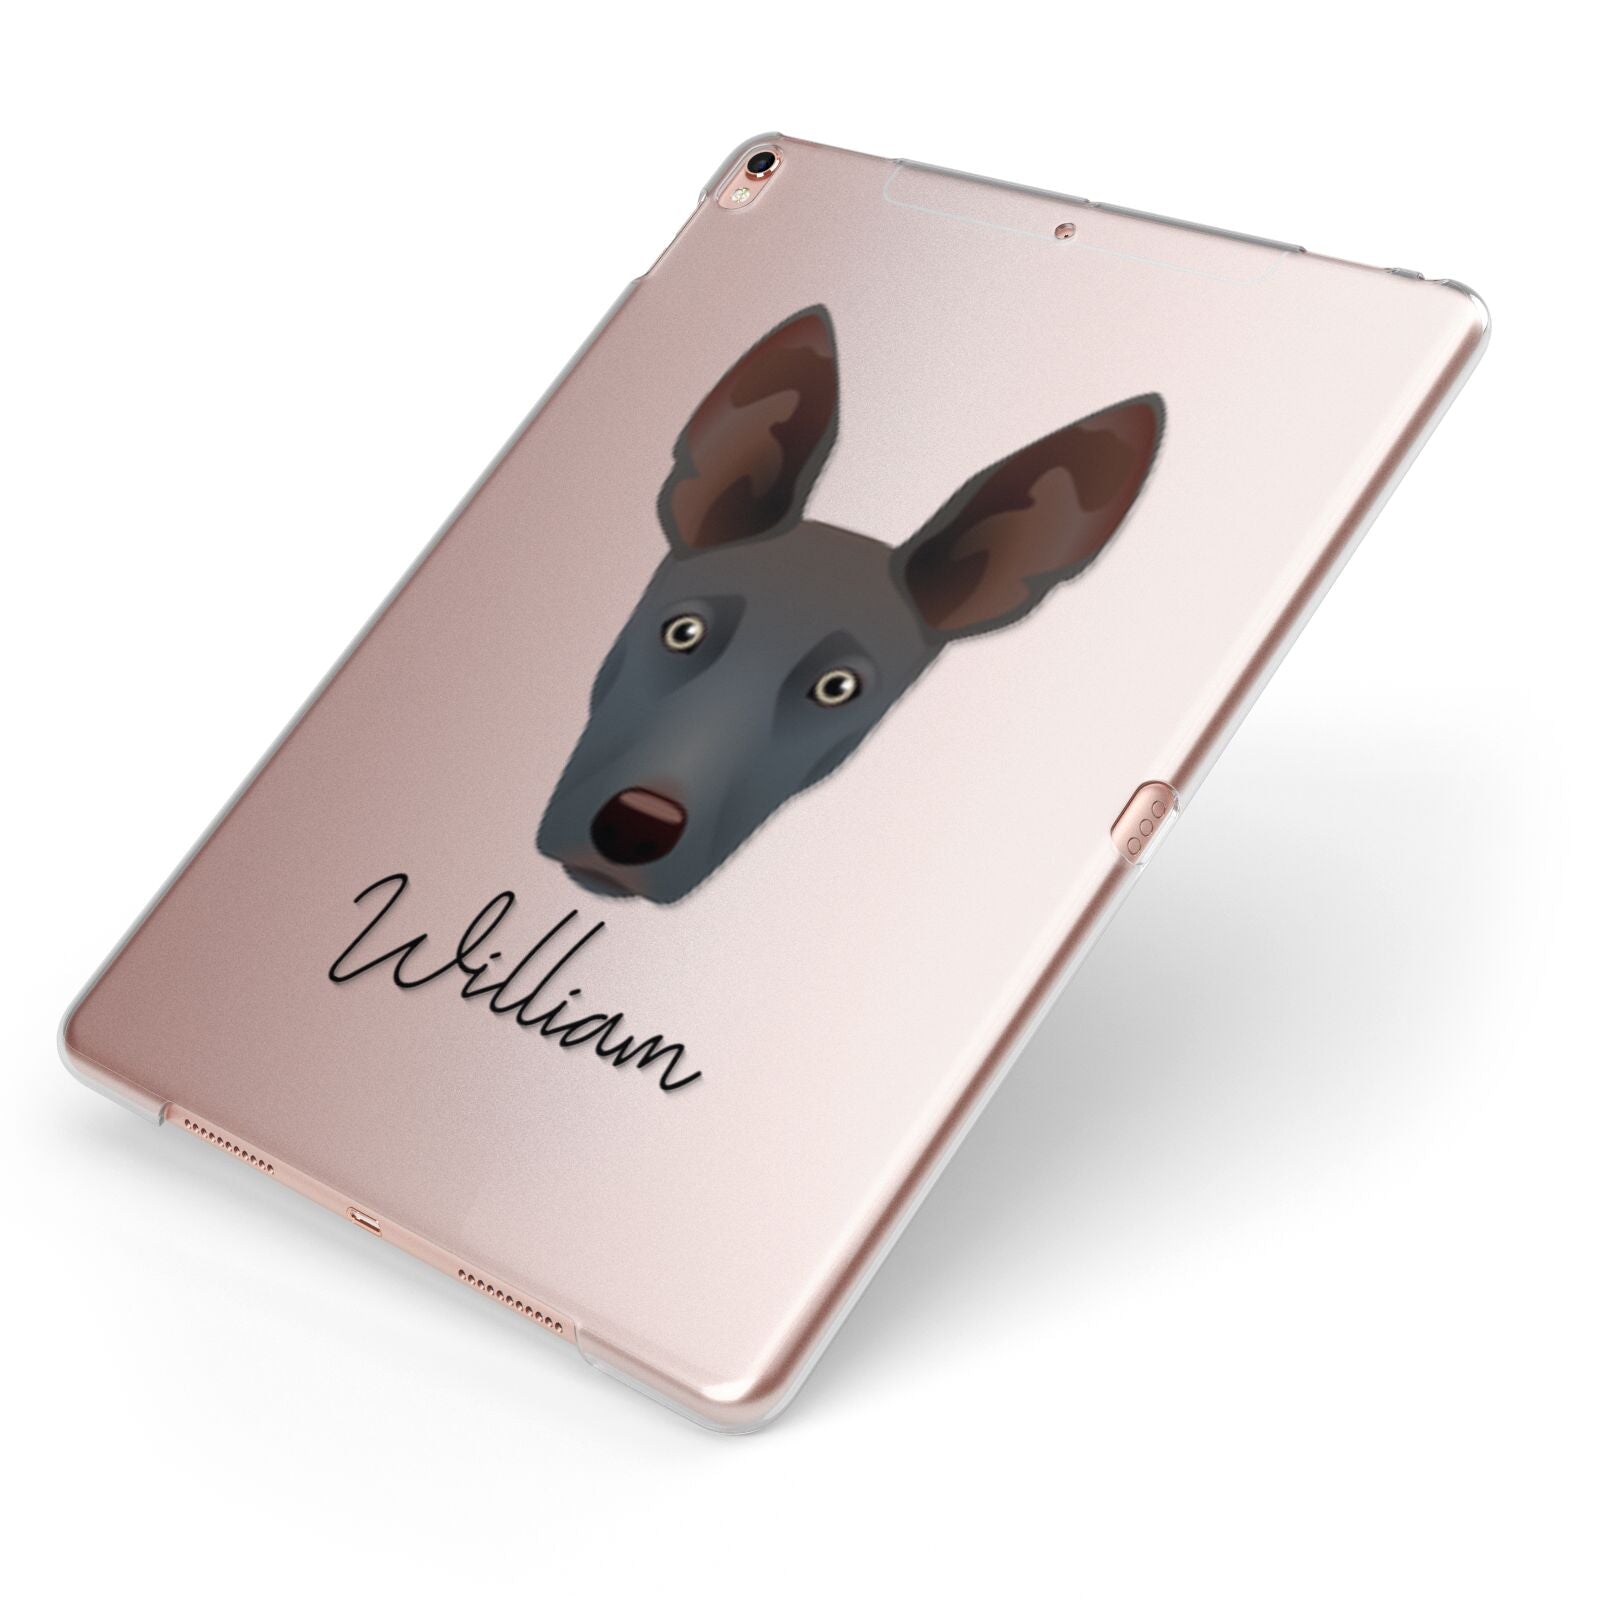 Ibizan Hound Personalised Apple iPad Case on Rose Gold iPad Side View